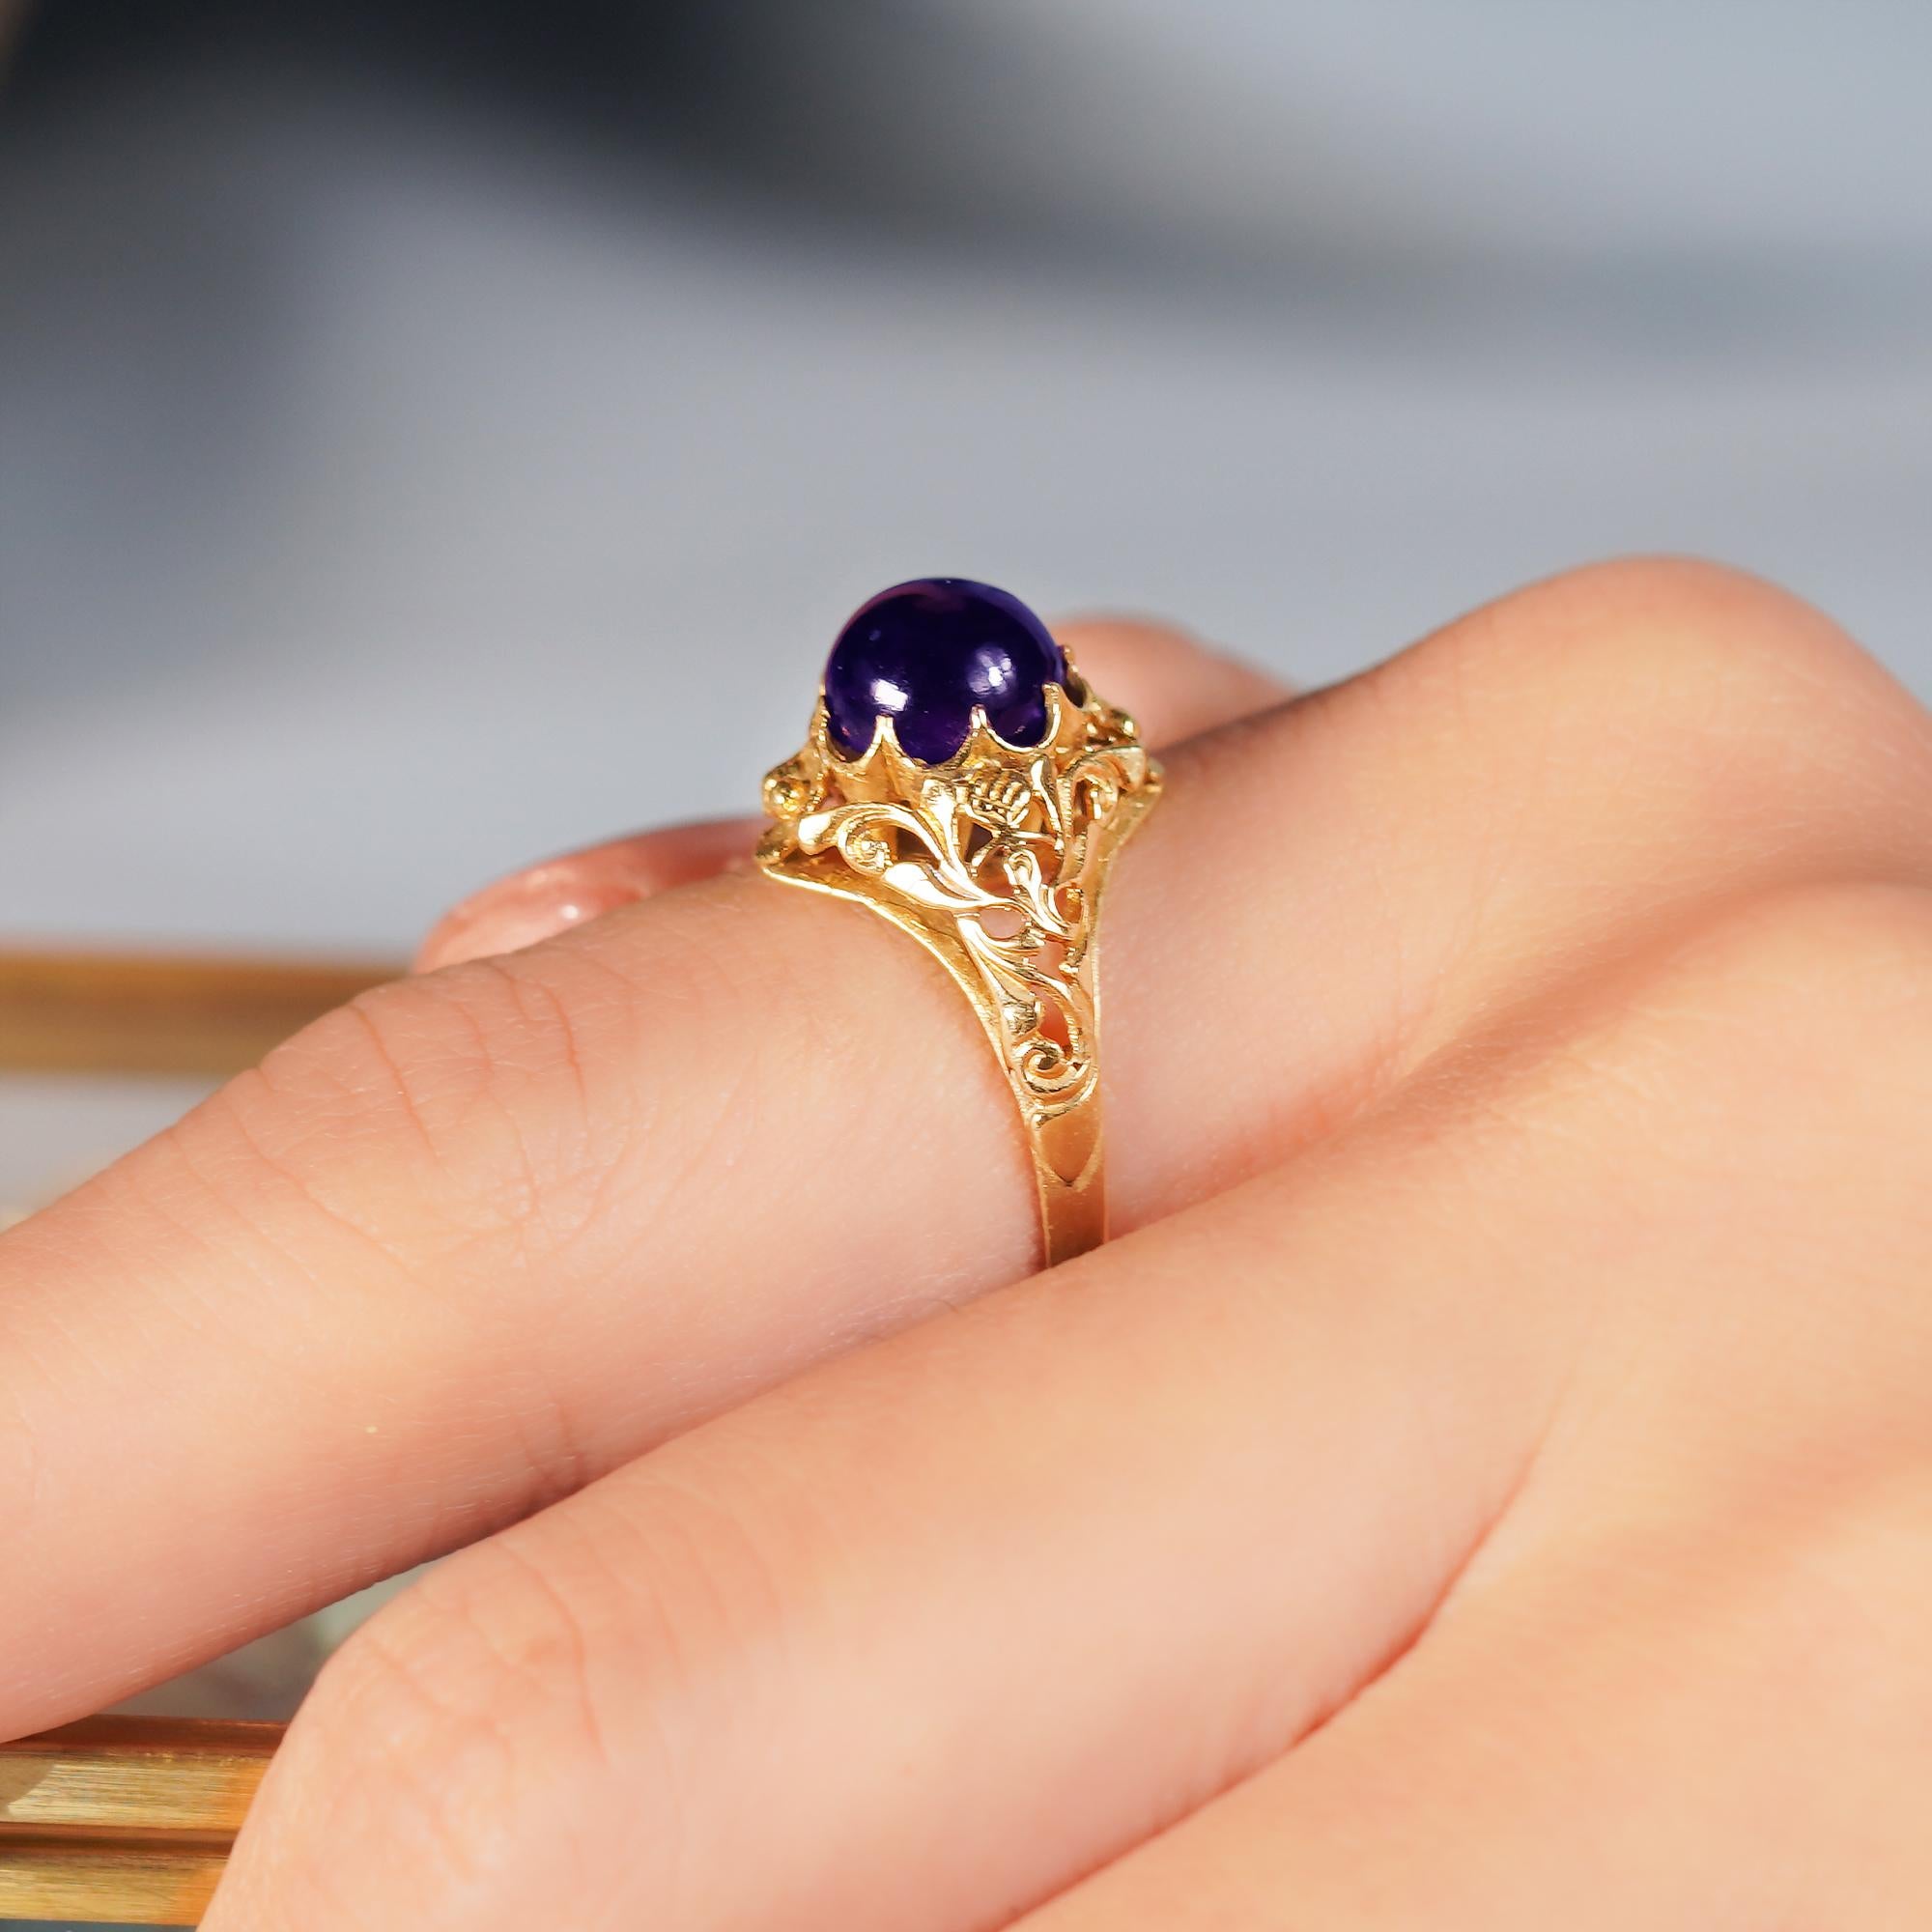 For Sale:  Natural Cabochon Amethyst Vintage Style Filigree Ring in Solid 9K Yellow Gold 10